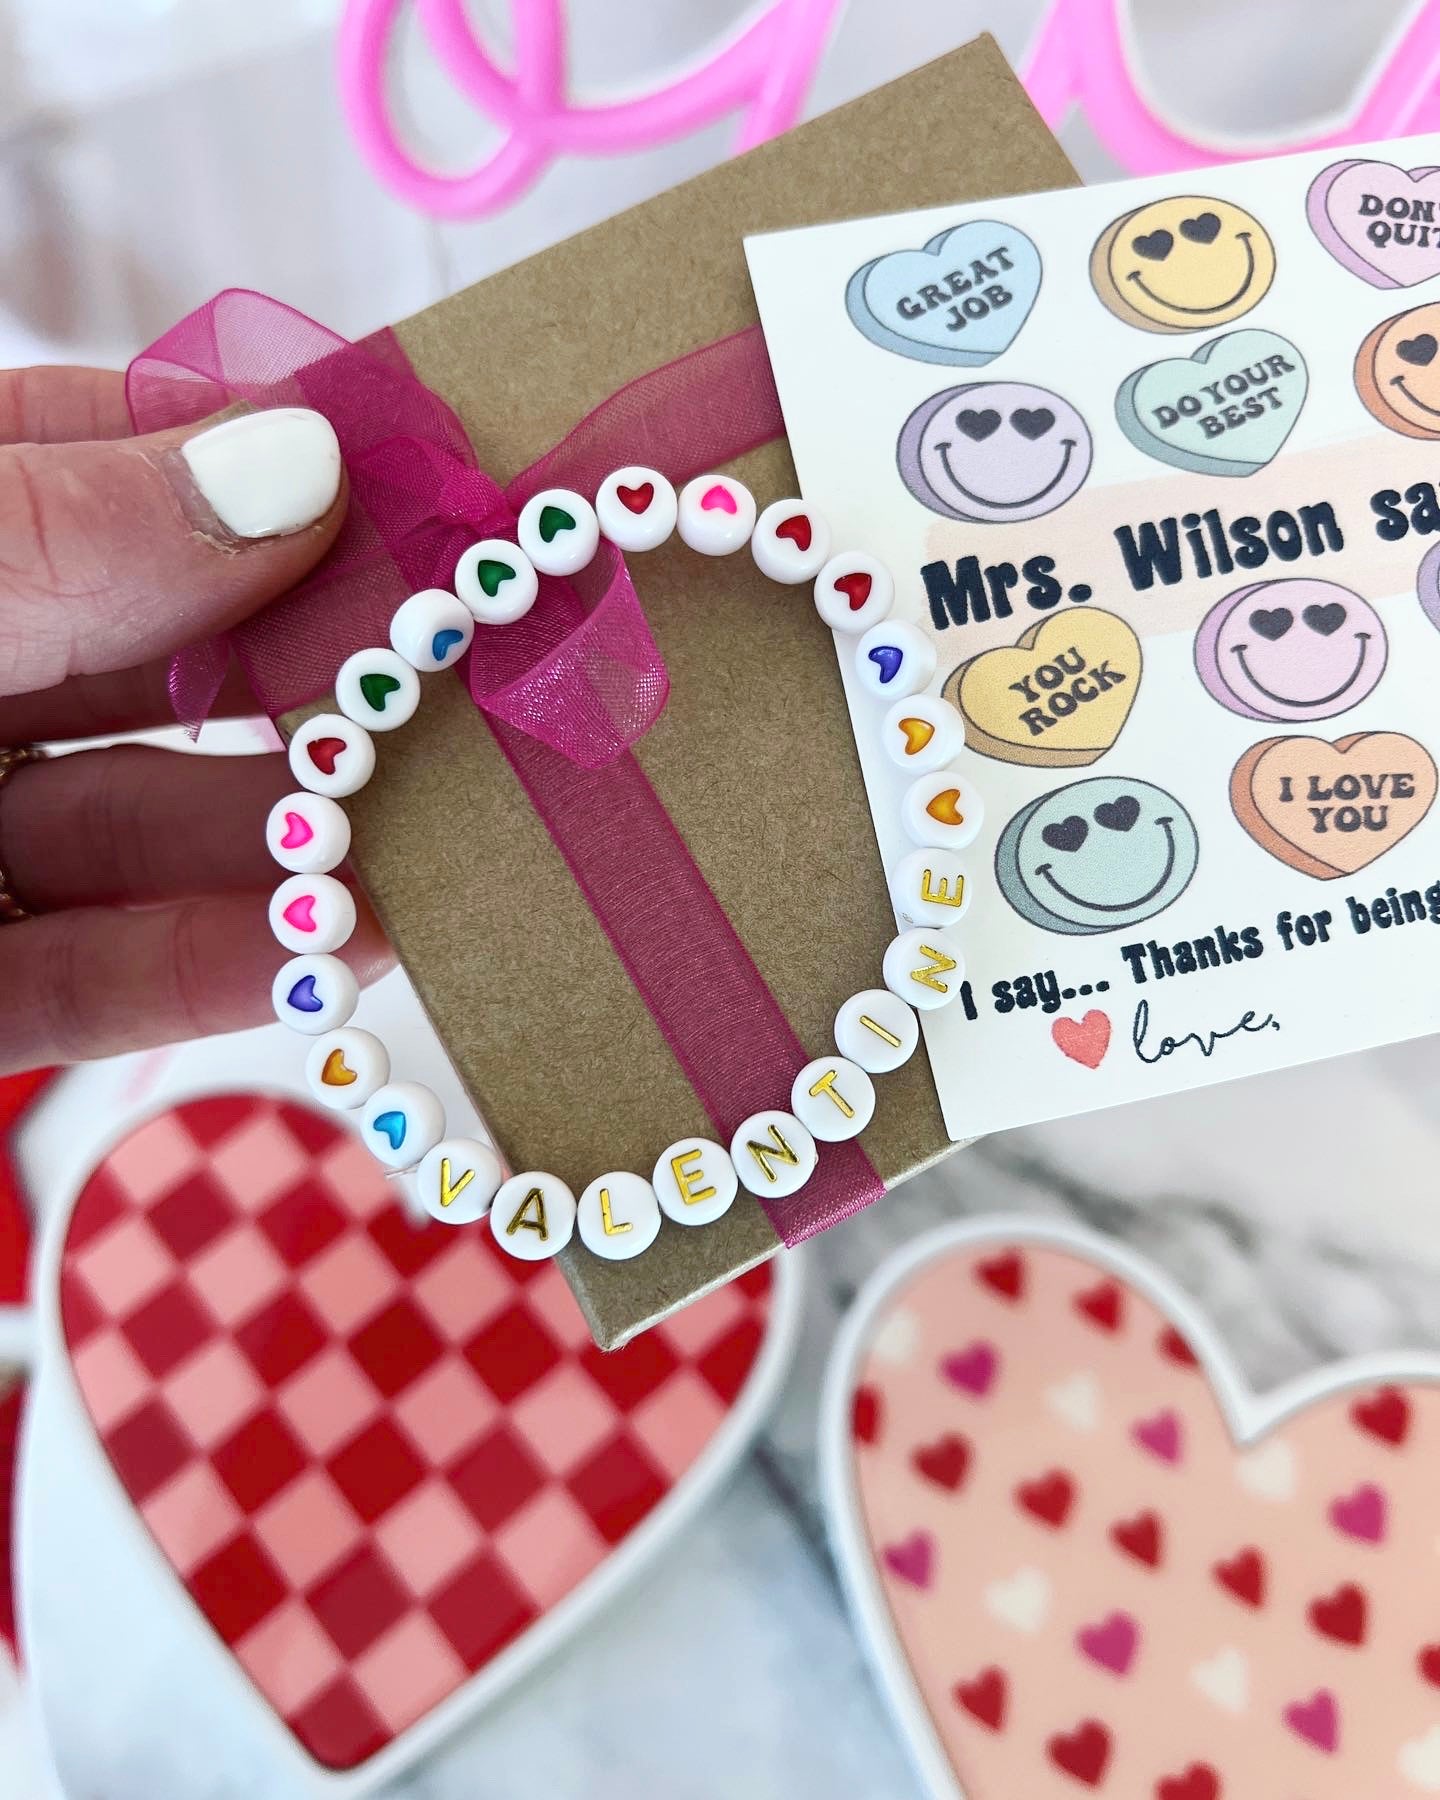 Candy Heart Card Teacher Valentine's Day gift,Valentine beaded bracelet, card, box & ribbon included! Valentine gift for teacher from student